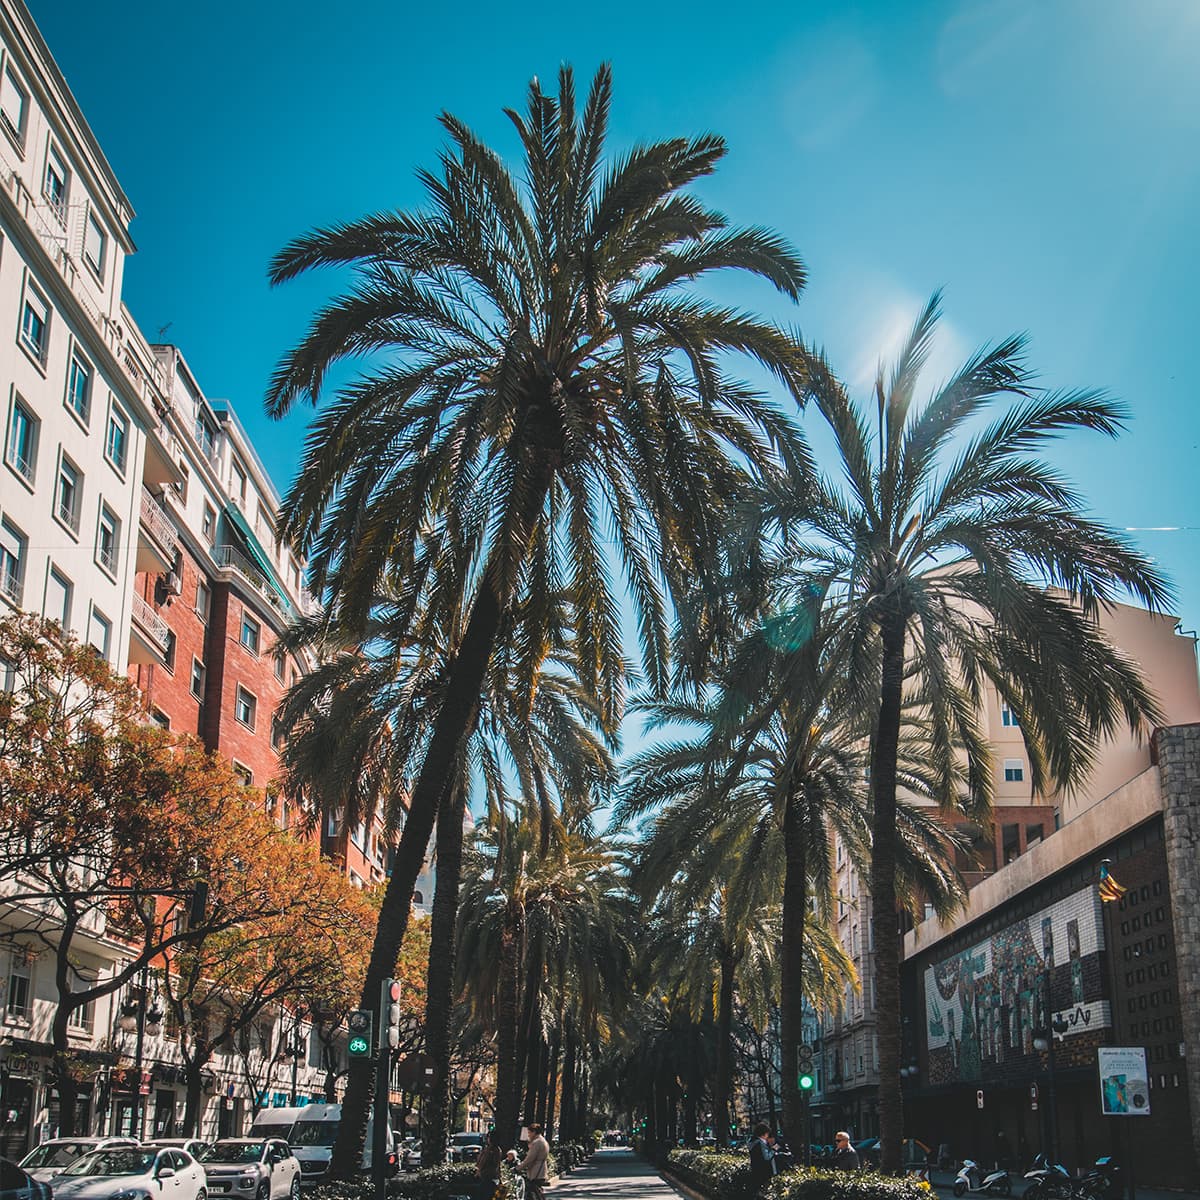 Sunshine on the palm trees of Valencia's square